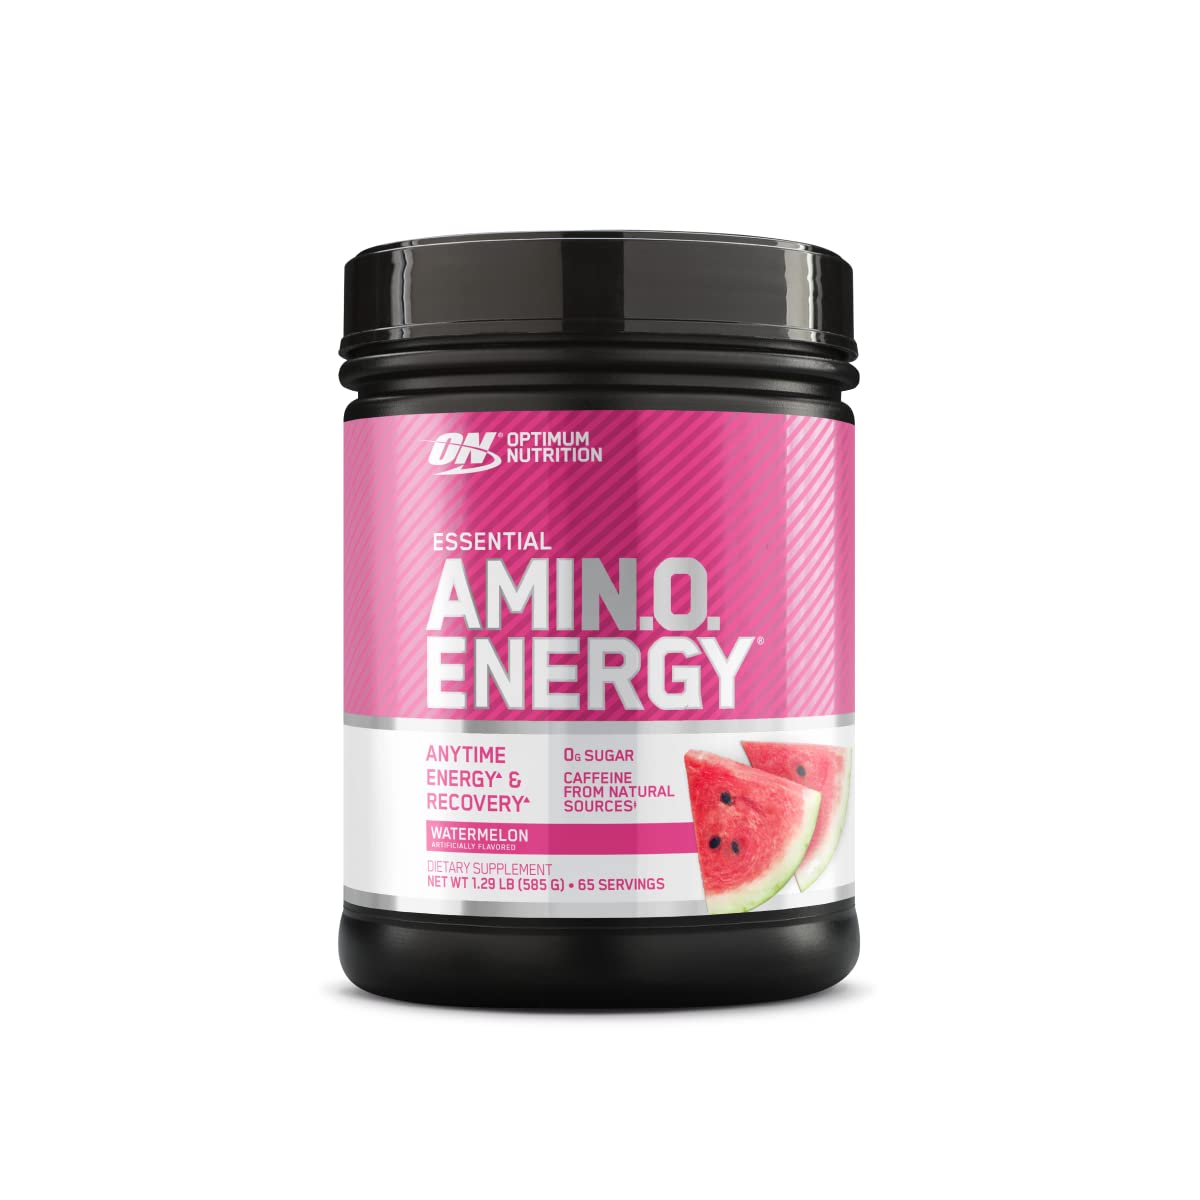 Optimum Nutrition Amino Energy - Pre Workout with Green Tea, BCAA, Amino Acids, Keto Friendly, Green Coffee Extract, Energy Powder - Watermelon, 65 Servings (Packaging May Vary)